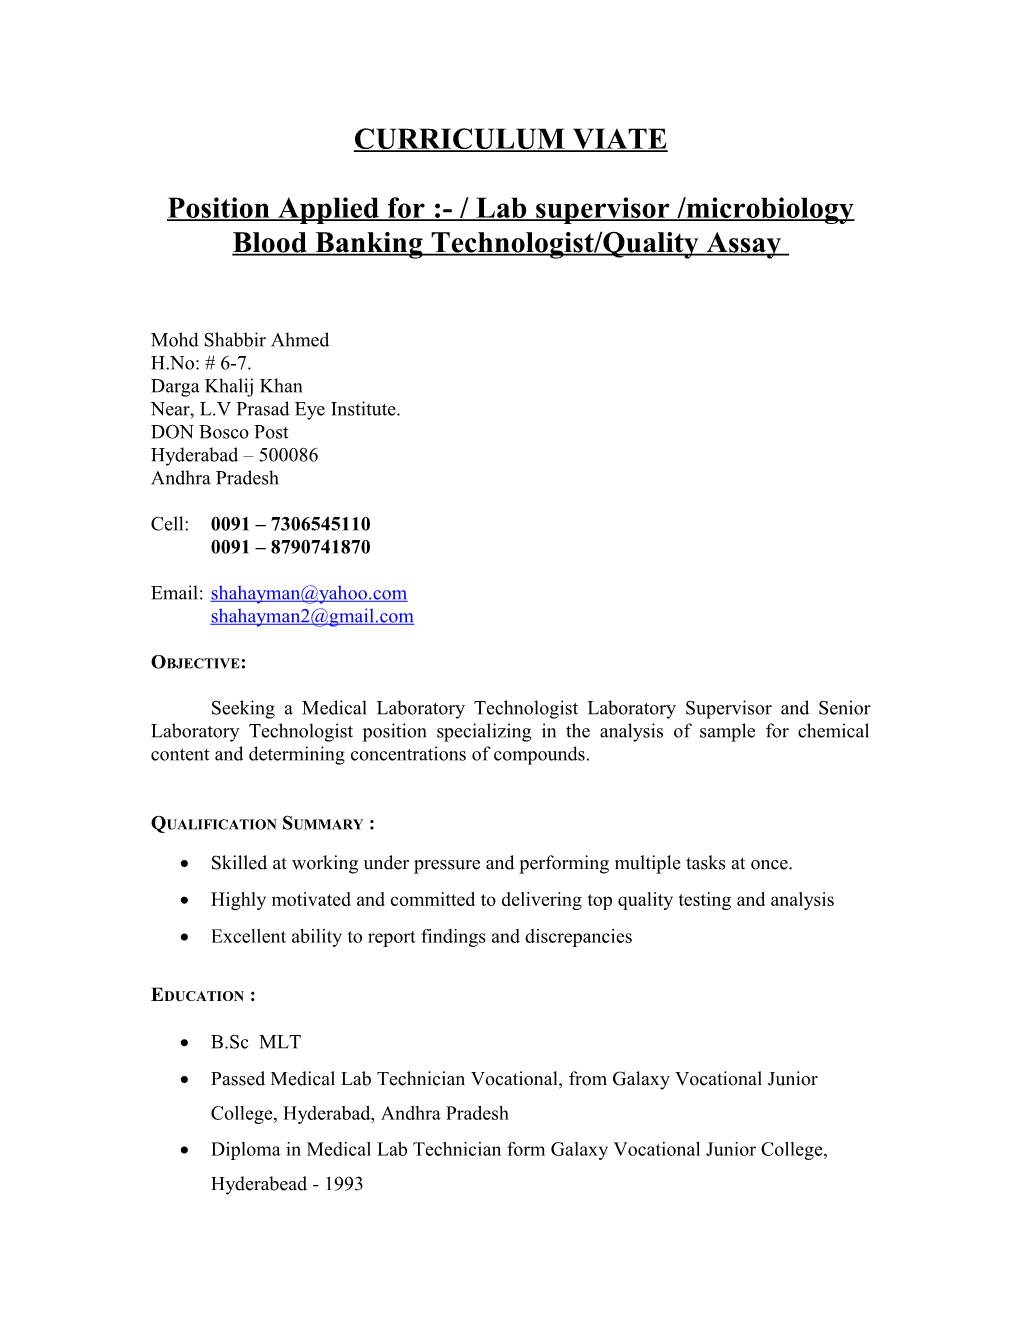 Position Applied for :- / Lab Supervisor /Microbiology Blood Banking Technologist/Quality